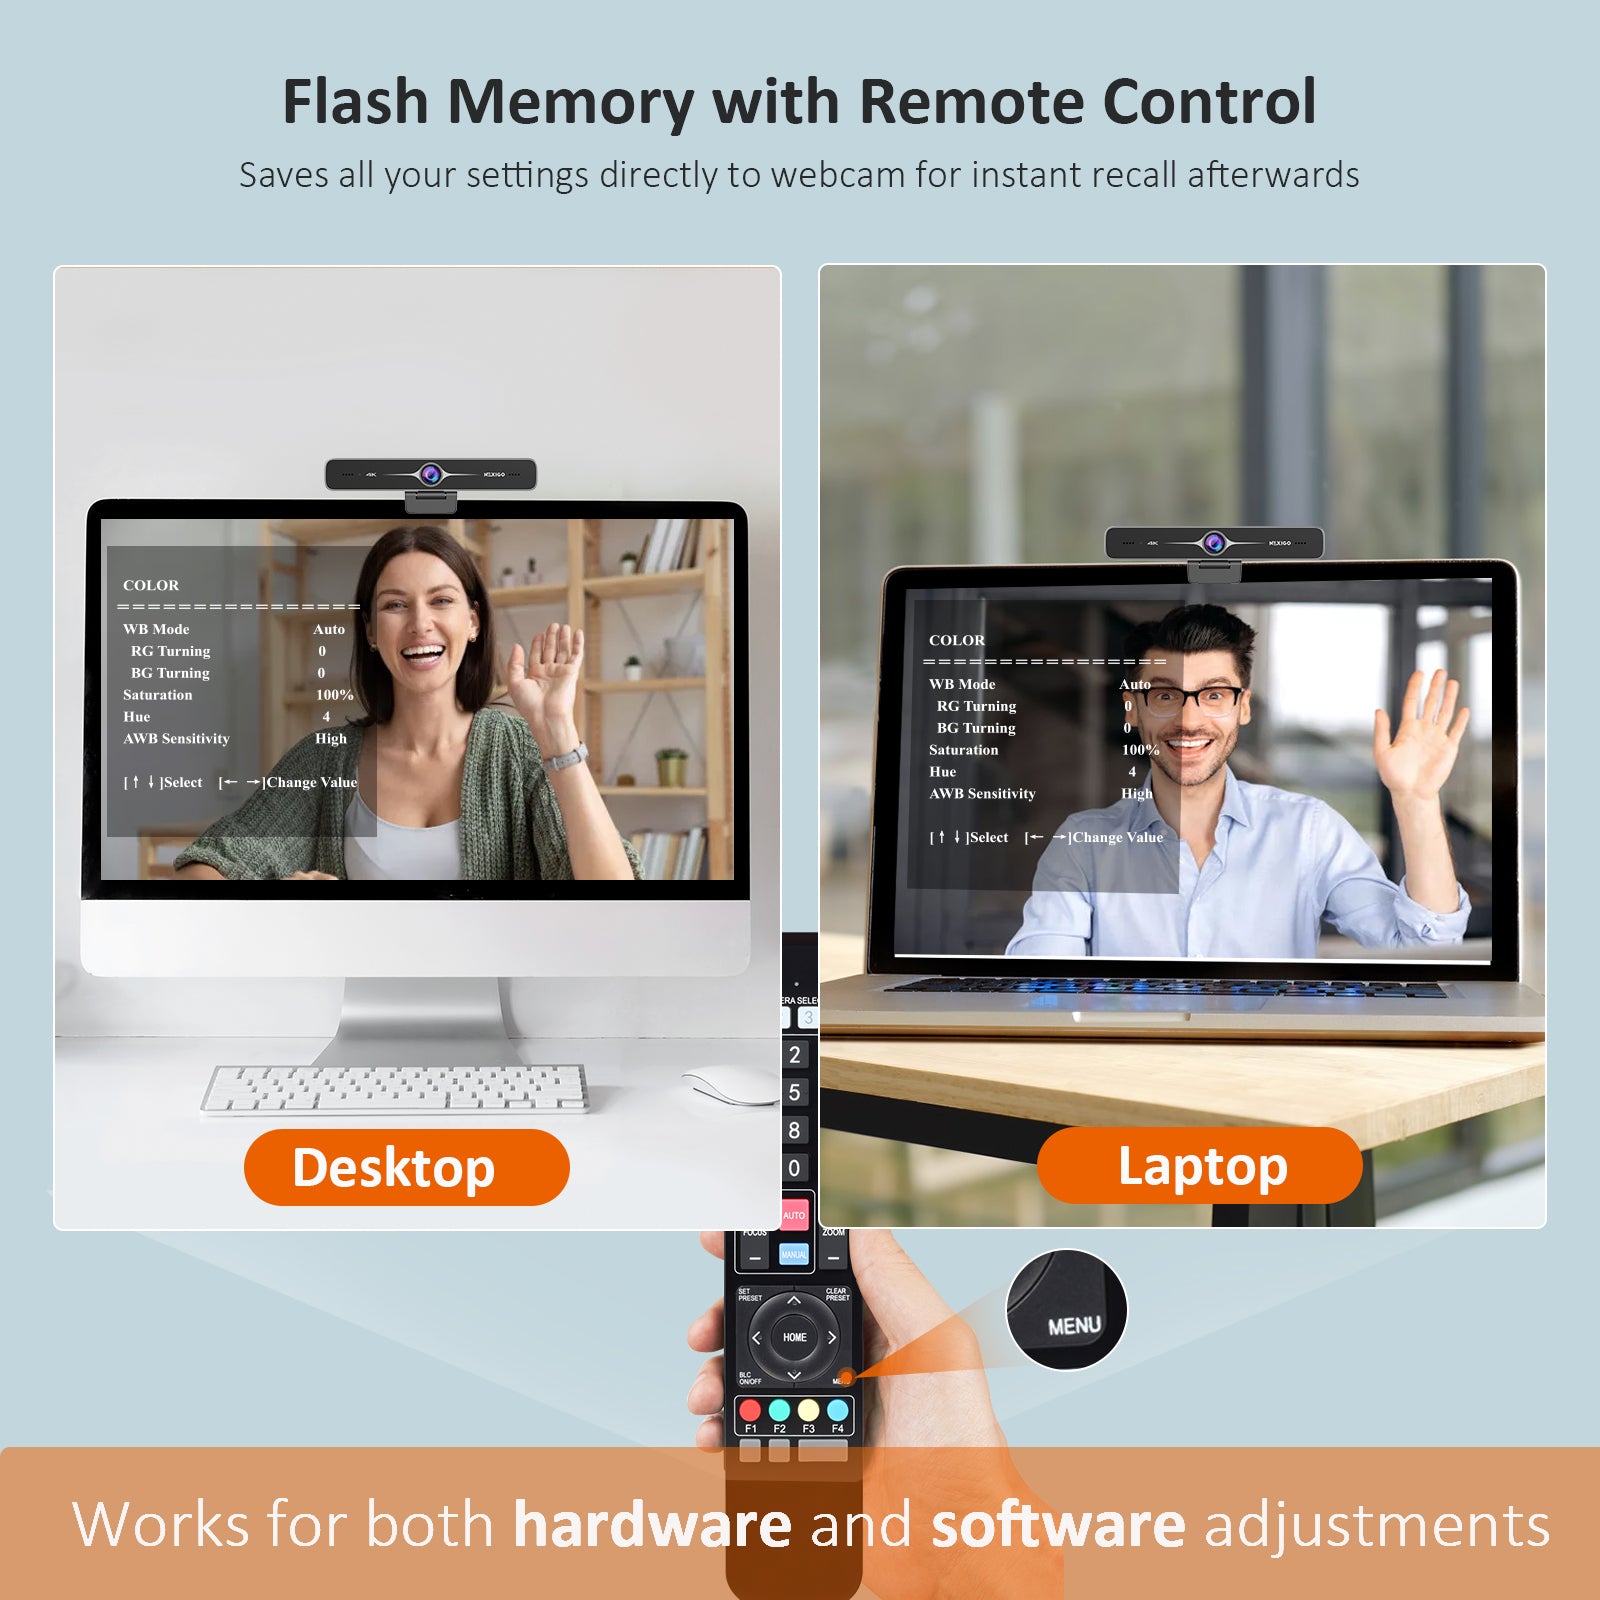 The Flash Memory feature allows saving the same webcam settings on two different computers. 